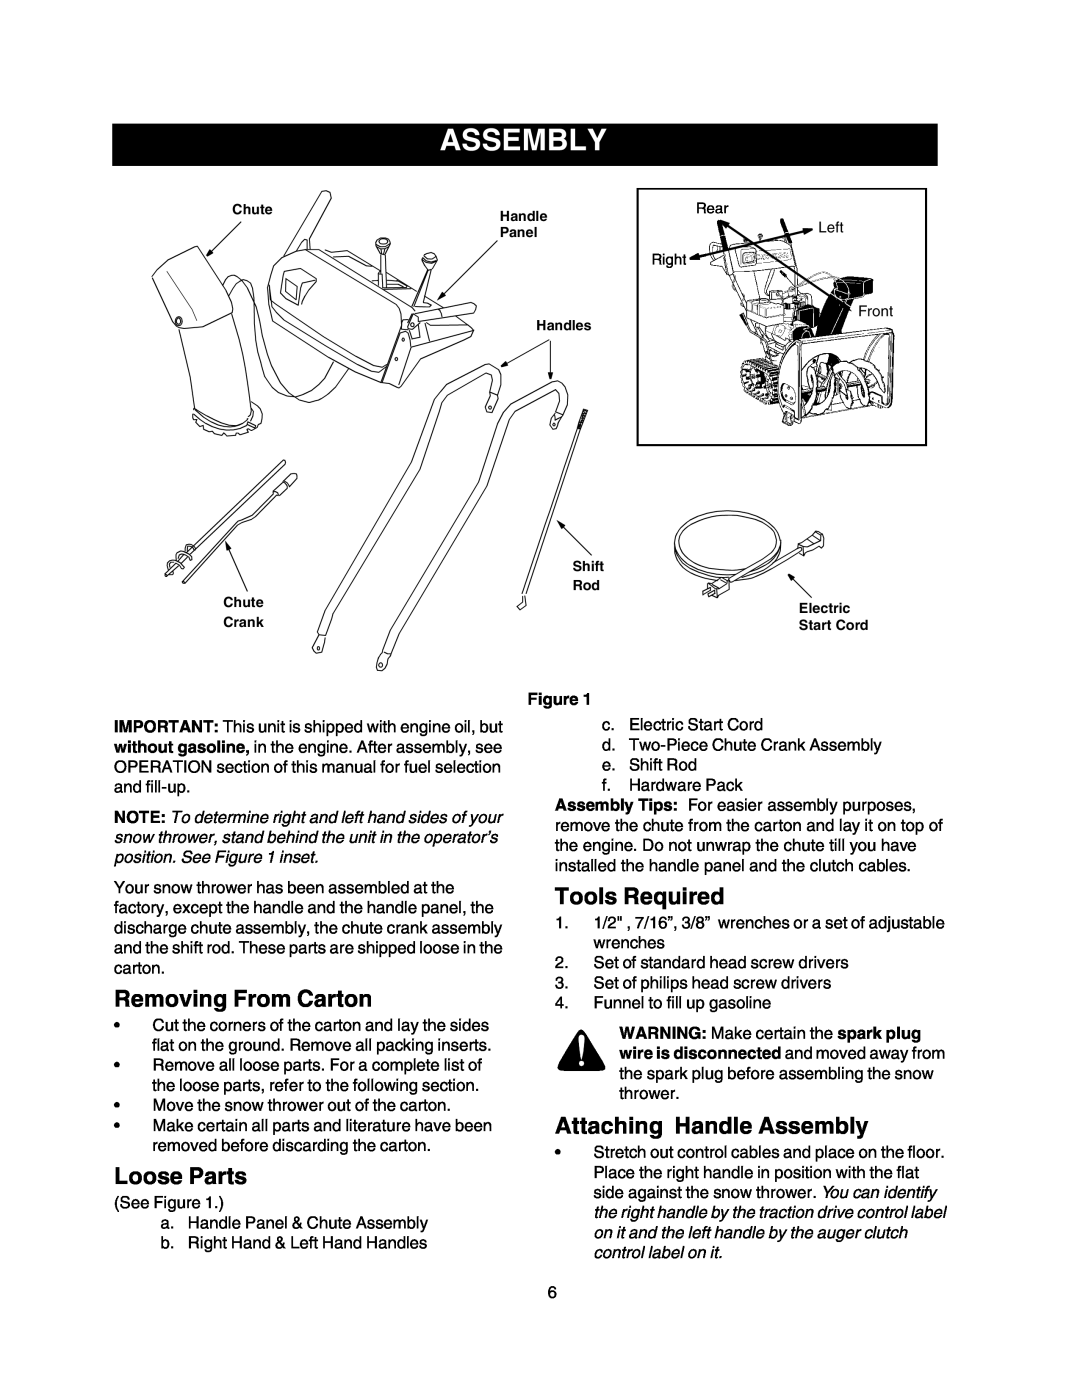 Craftsman 247.88855 owner manual Removing From Carton, Loose Parts, Tools Required, Attaching Handle Assembly 